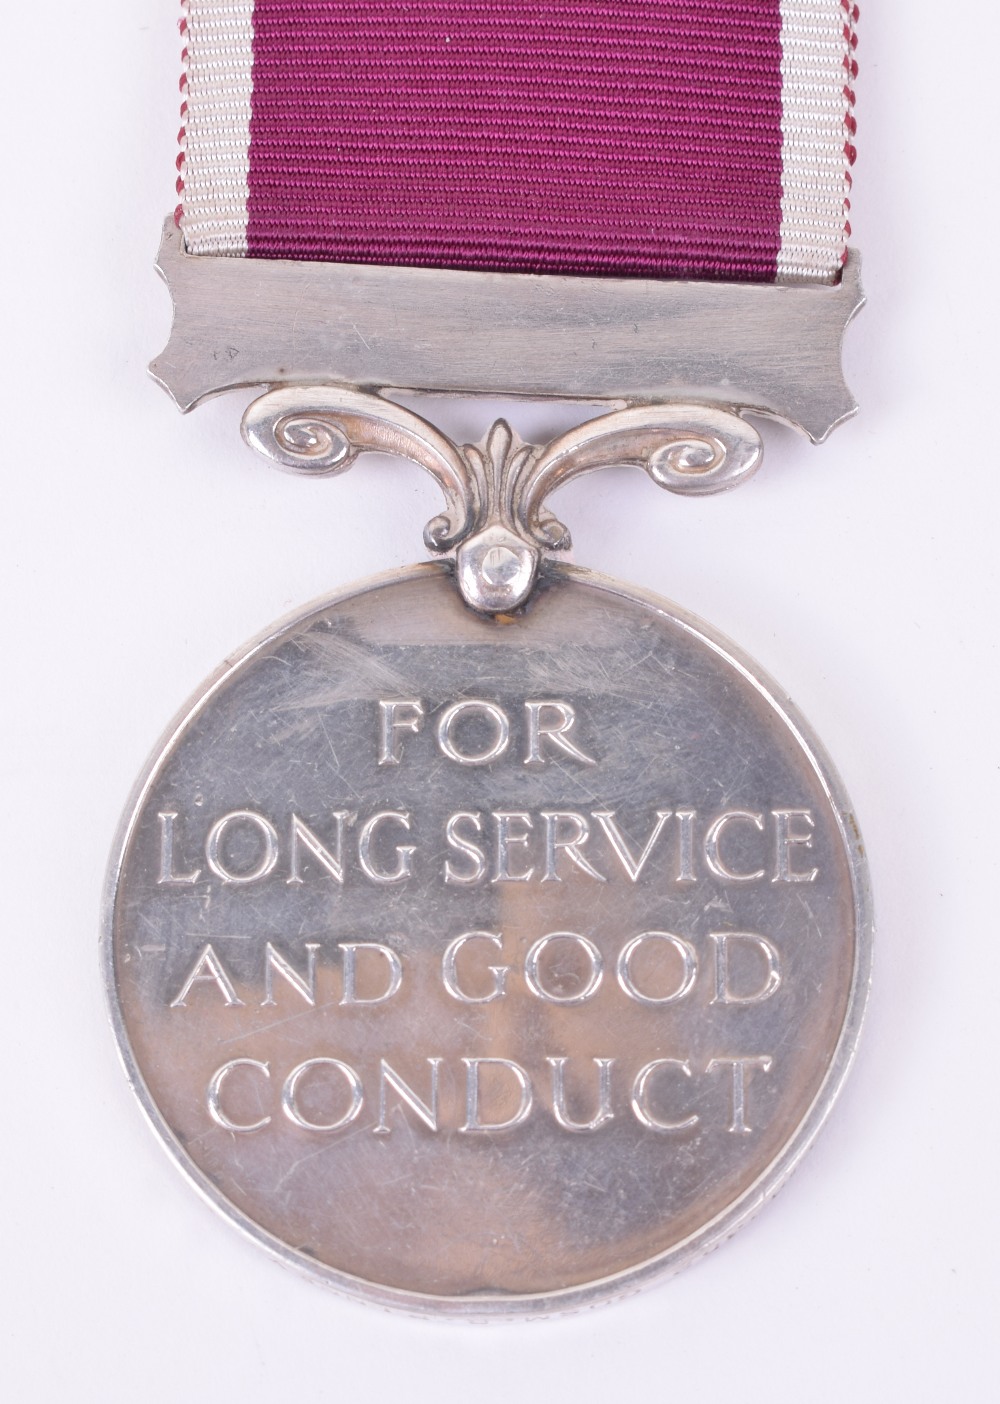 Elizabeth II Regular Army Long Service Good Conduct Medal Scots Guards - Image 2 of 3